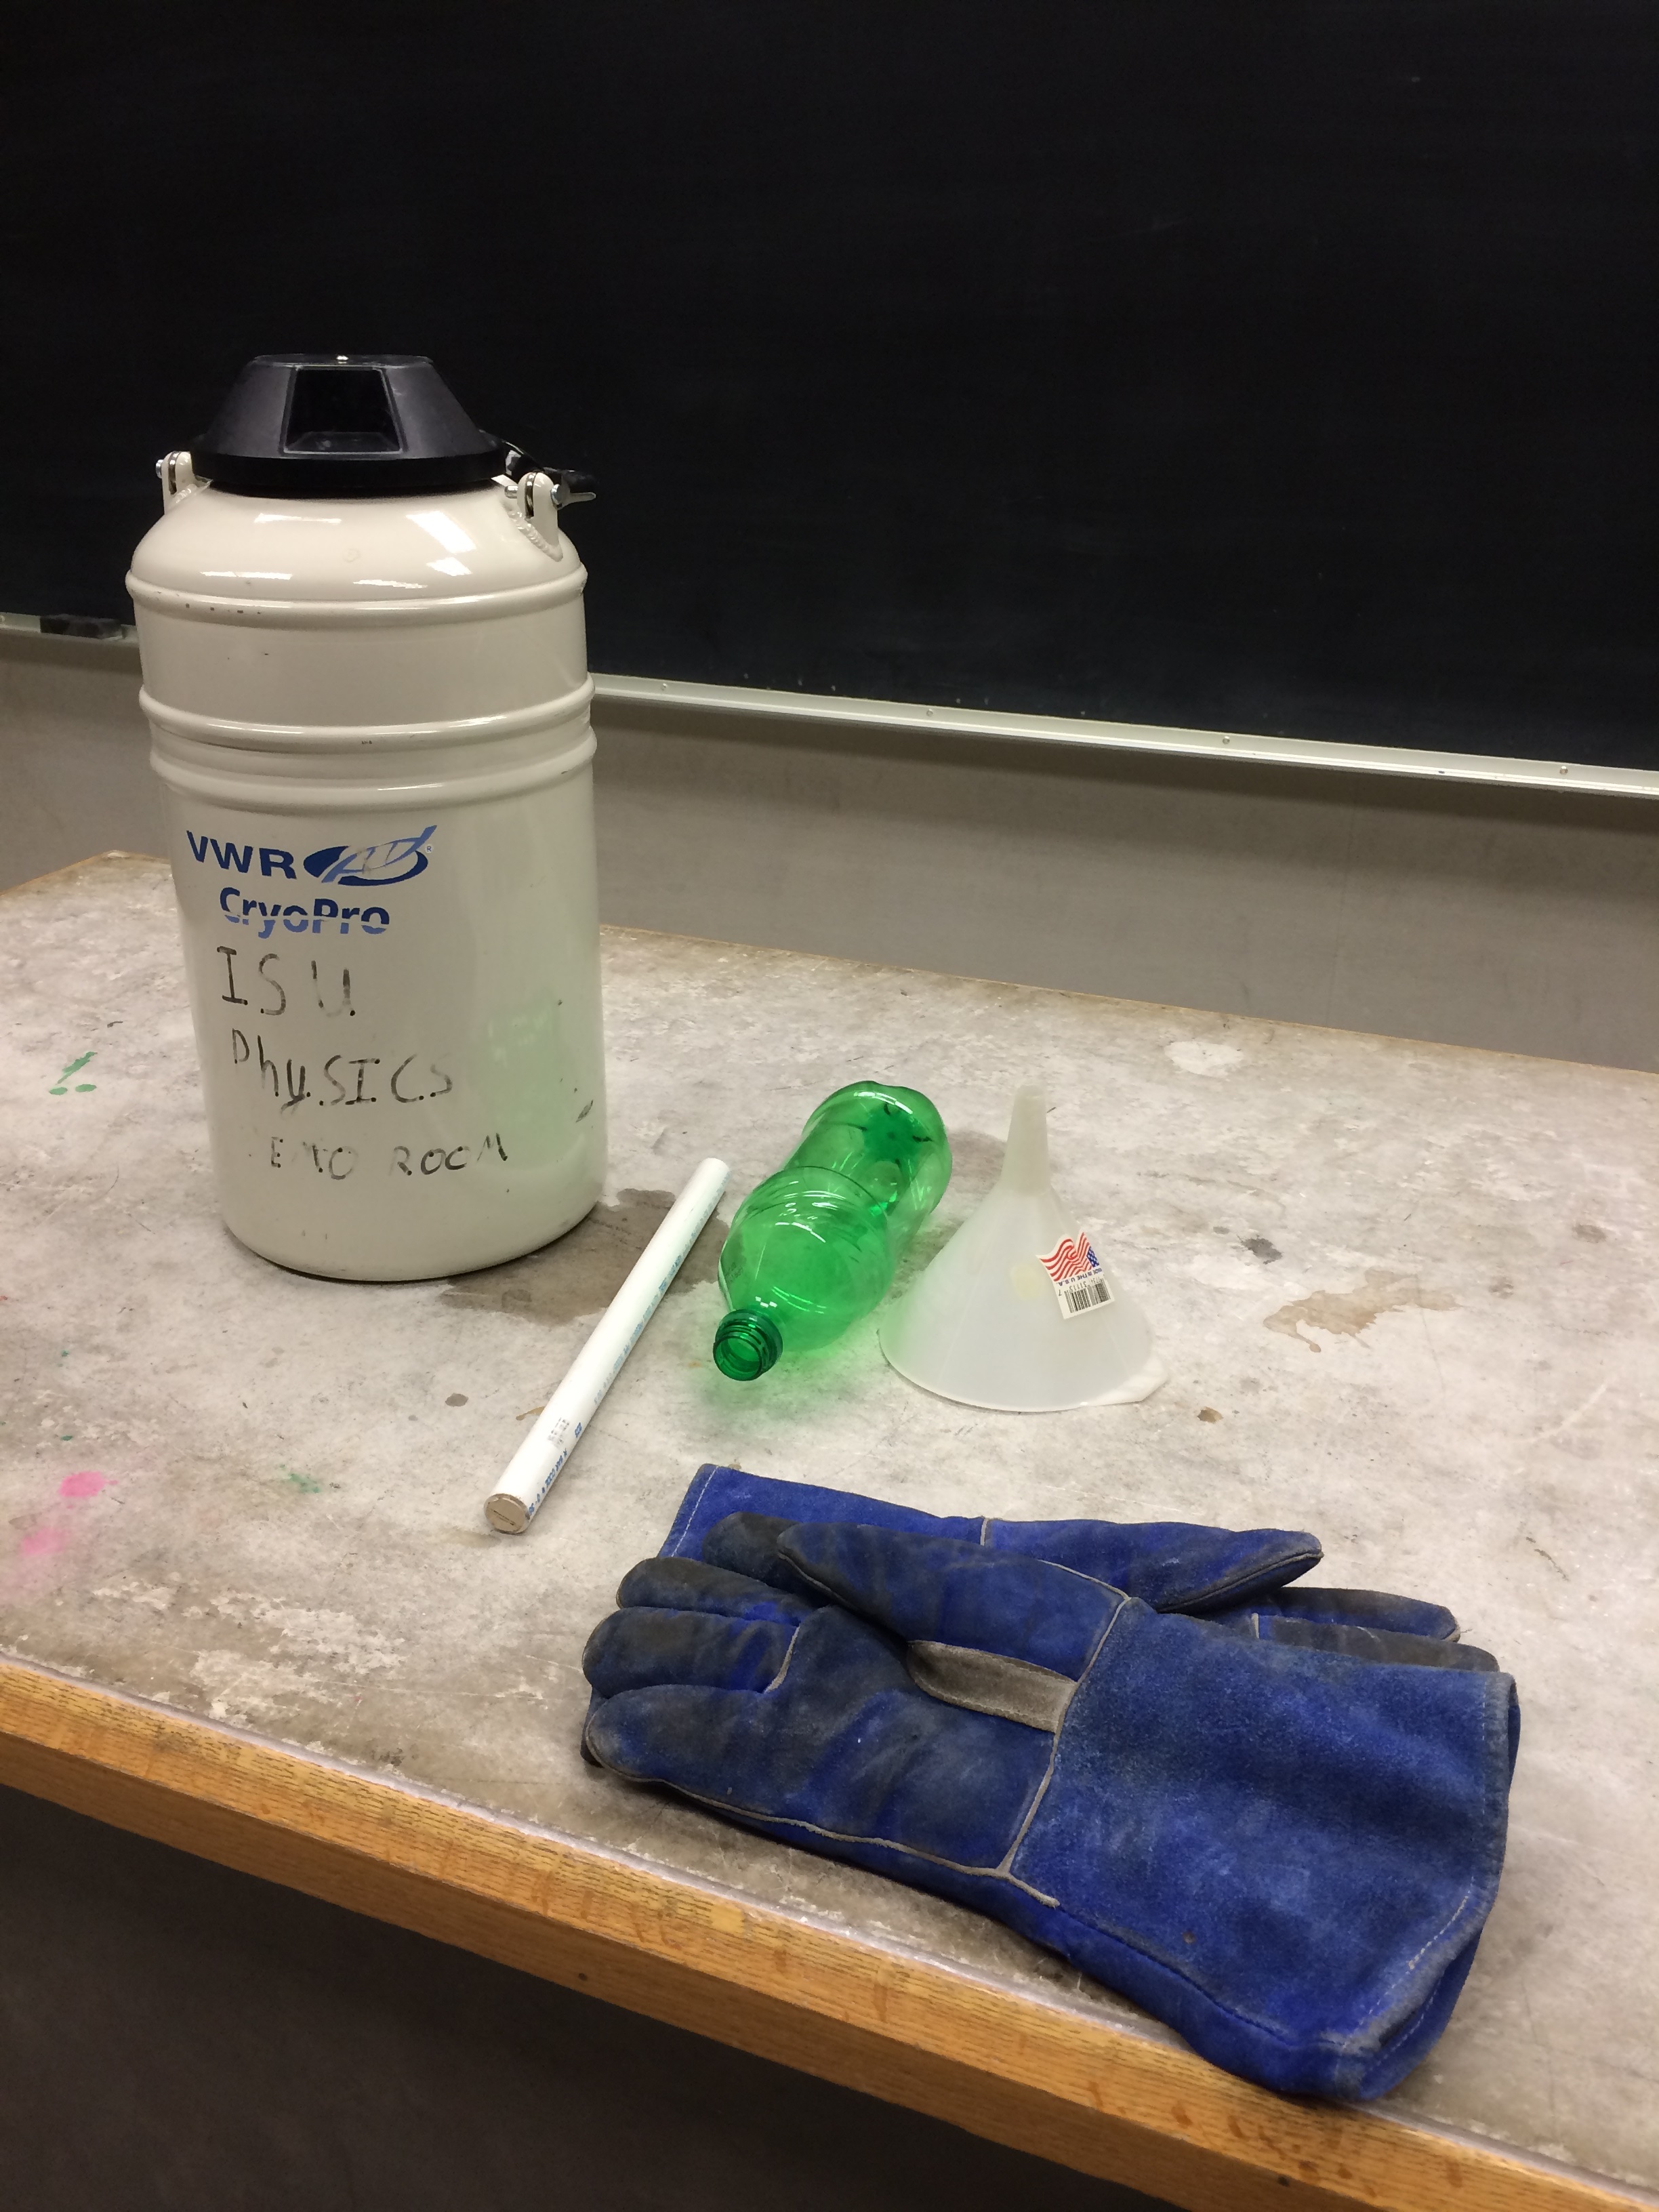 A container of liquid nitrogen by gloves and a small pop bottle